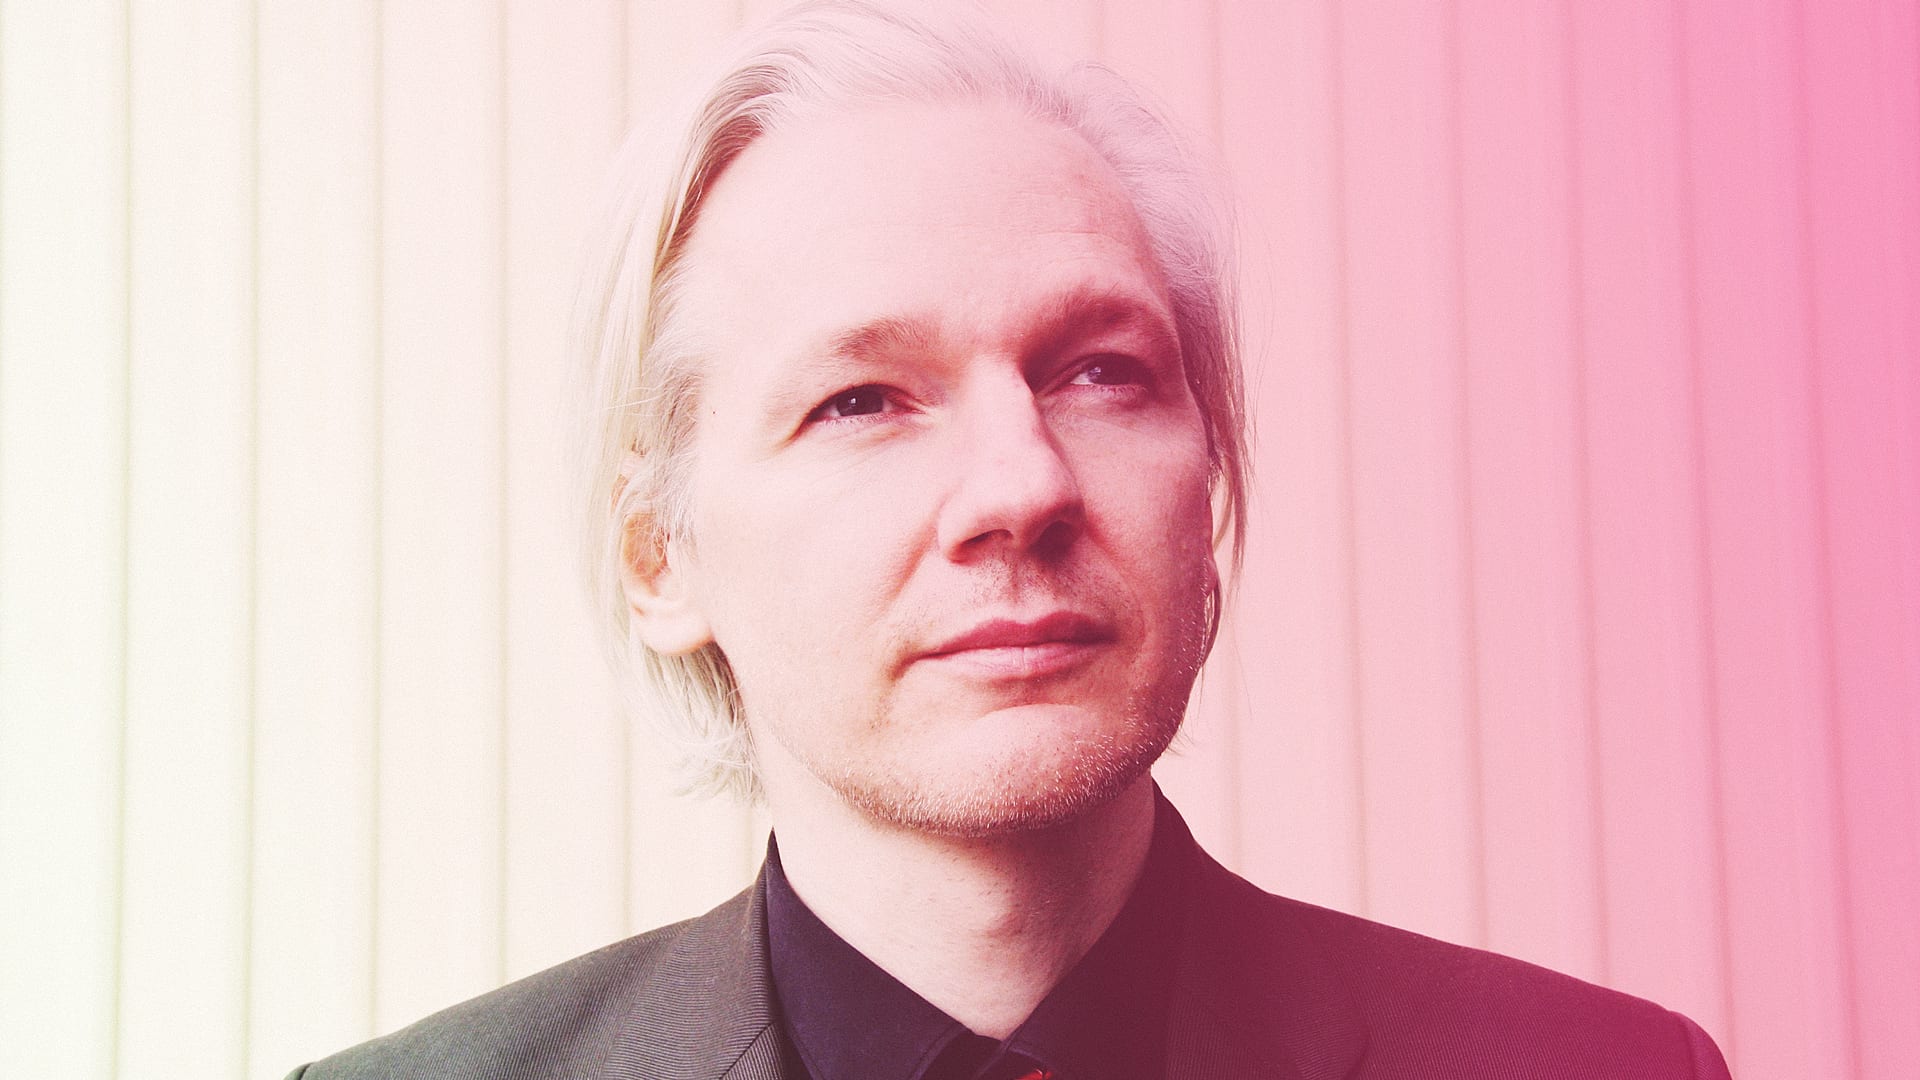 How WikiLeaks Has Changed: From Whistleblower To Weapon